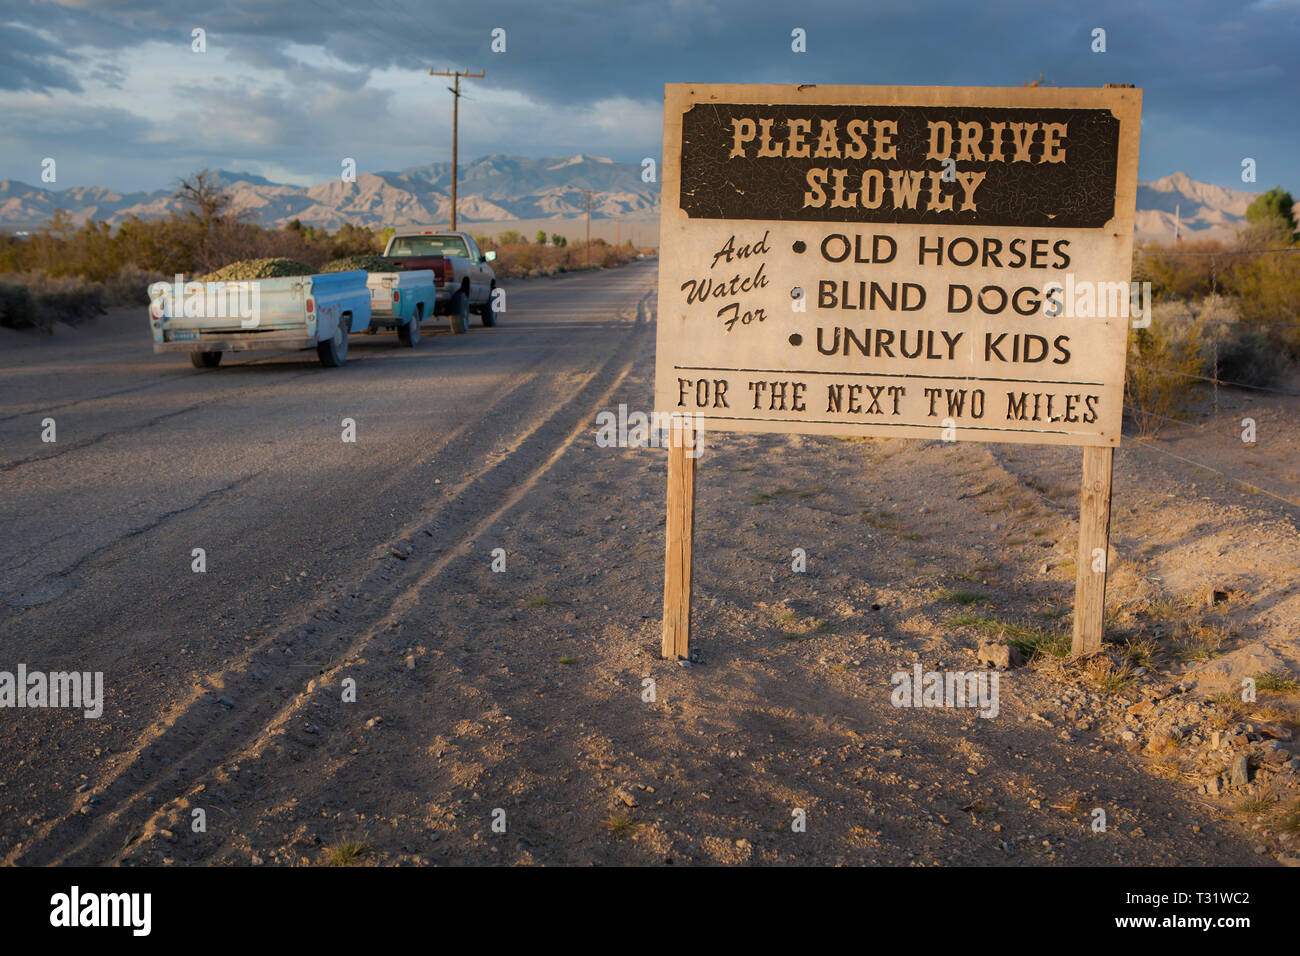 A 'drive slowly' warning sign on desert dirt road with a pickup truck hauling gravel. Stock Photo